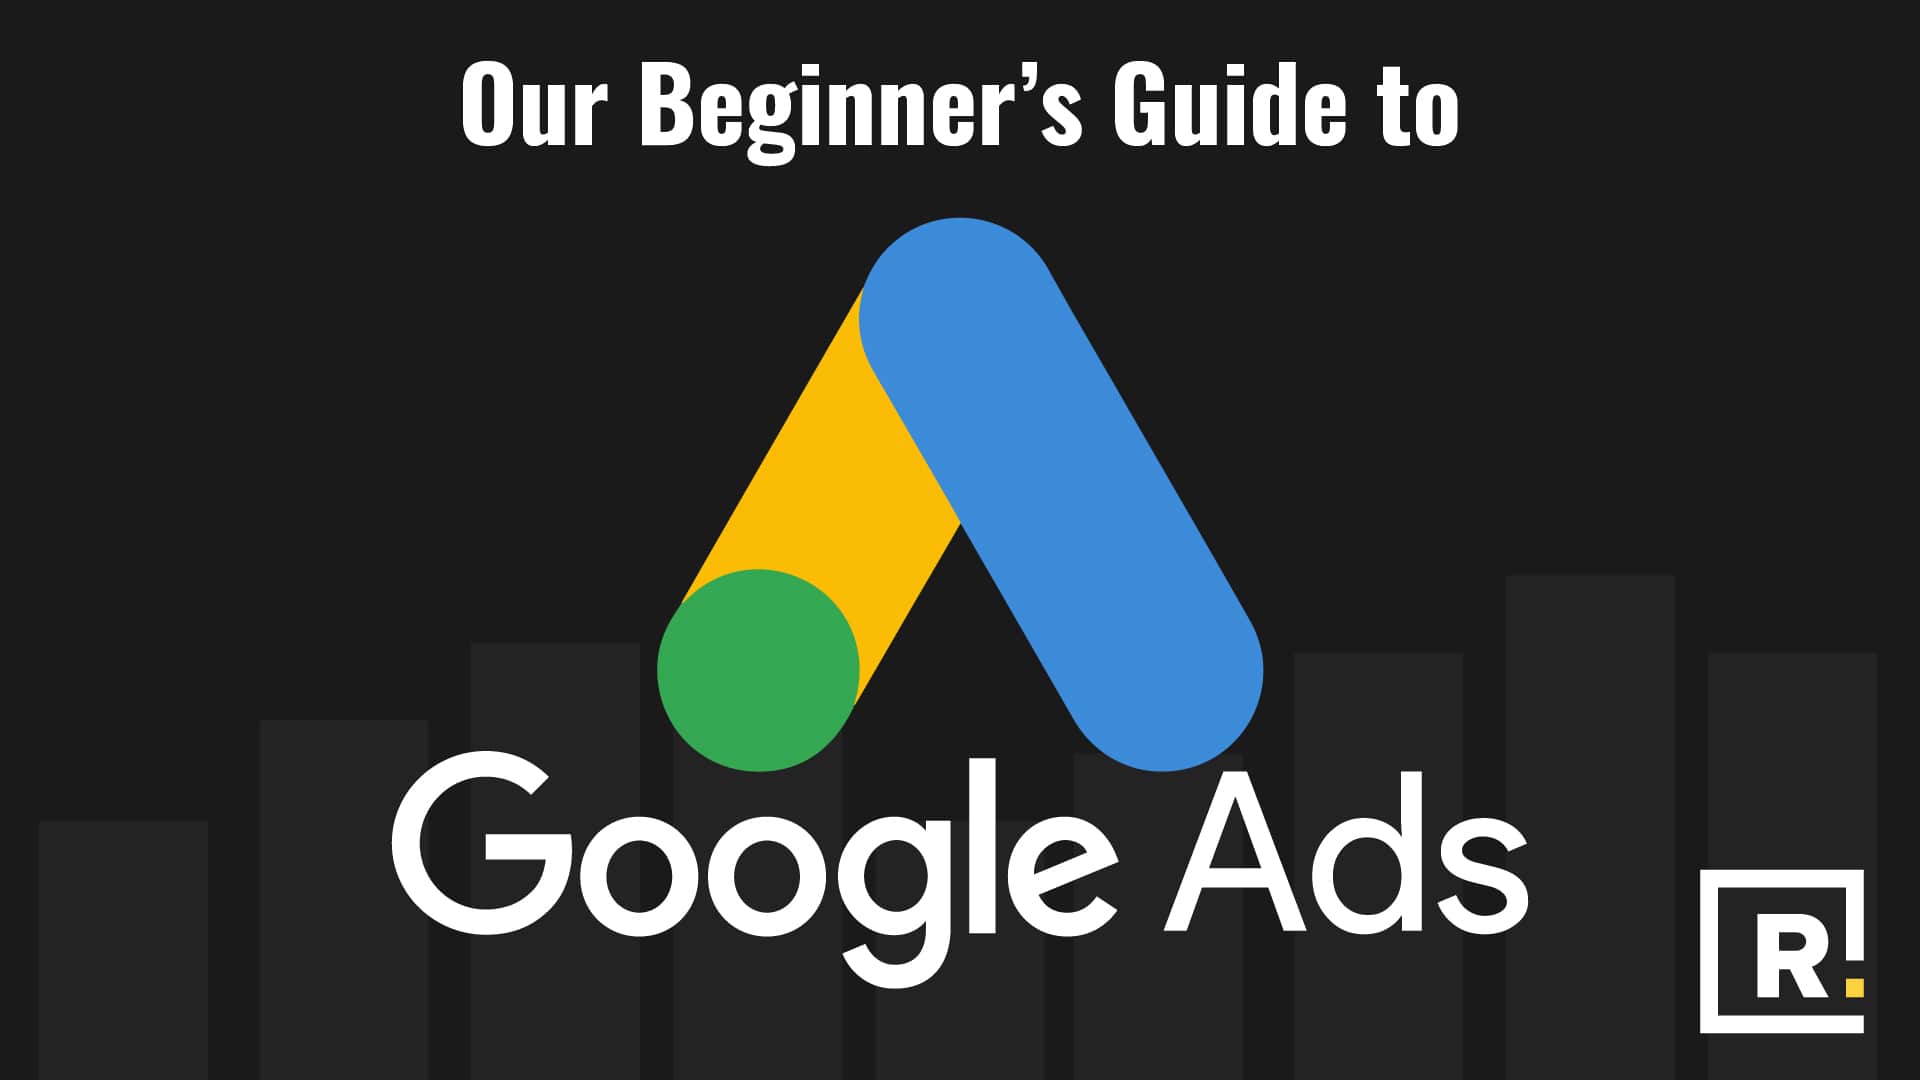 Featured image for “Beginner’s Guide to Google Ads”